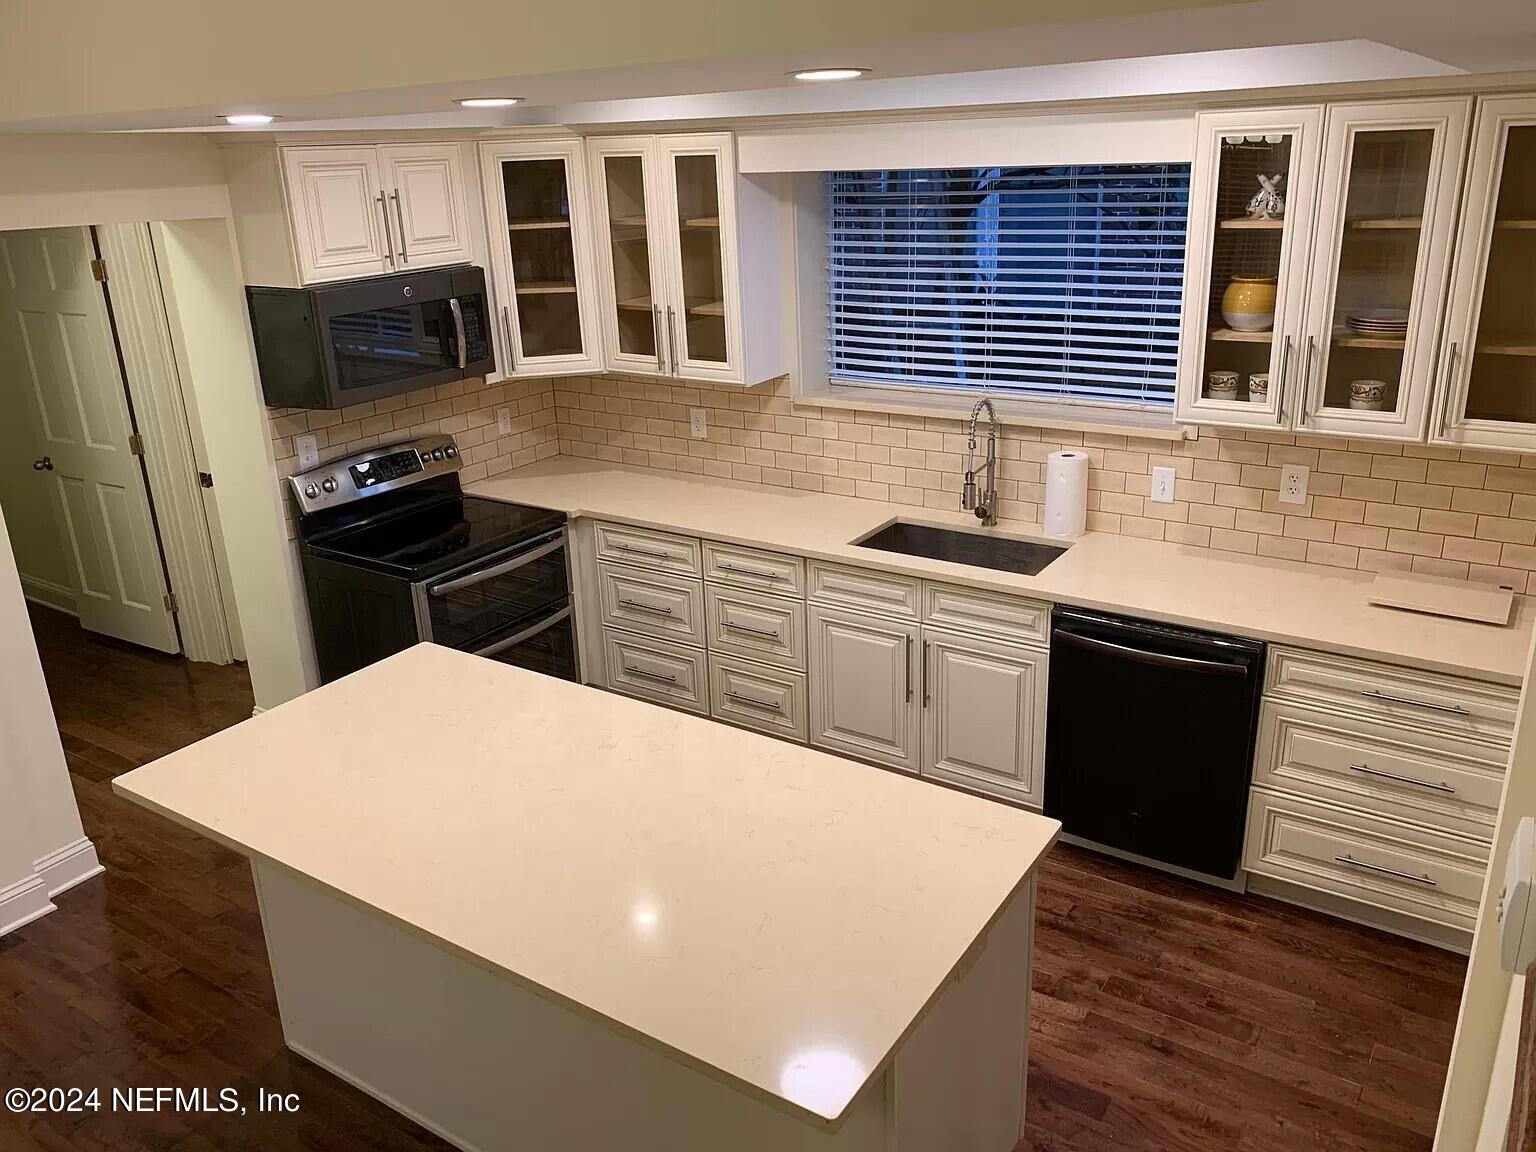 a kitchen with stainless steel appliances a stove a sink a microwave a refrigerator white cabinets and wooden floor